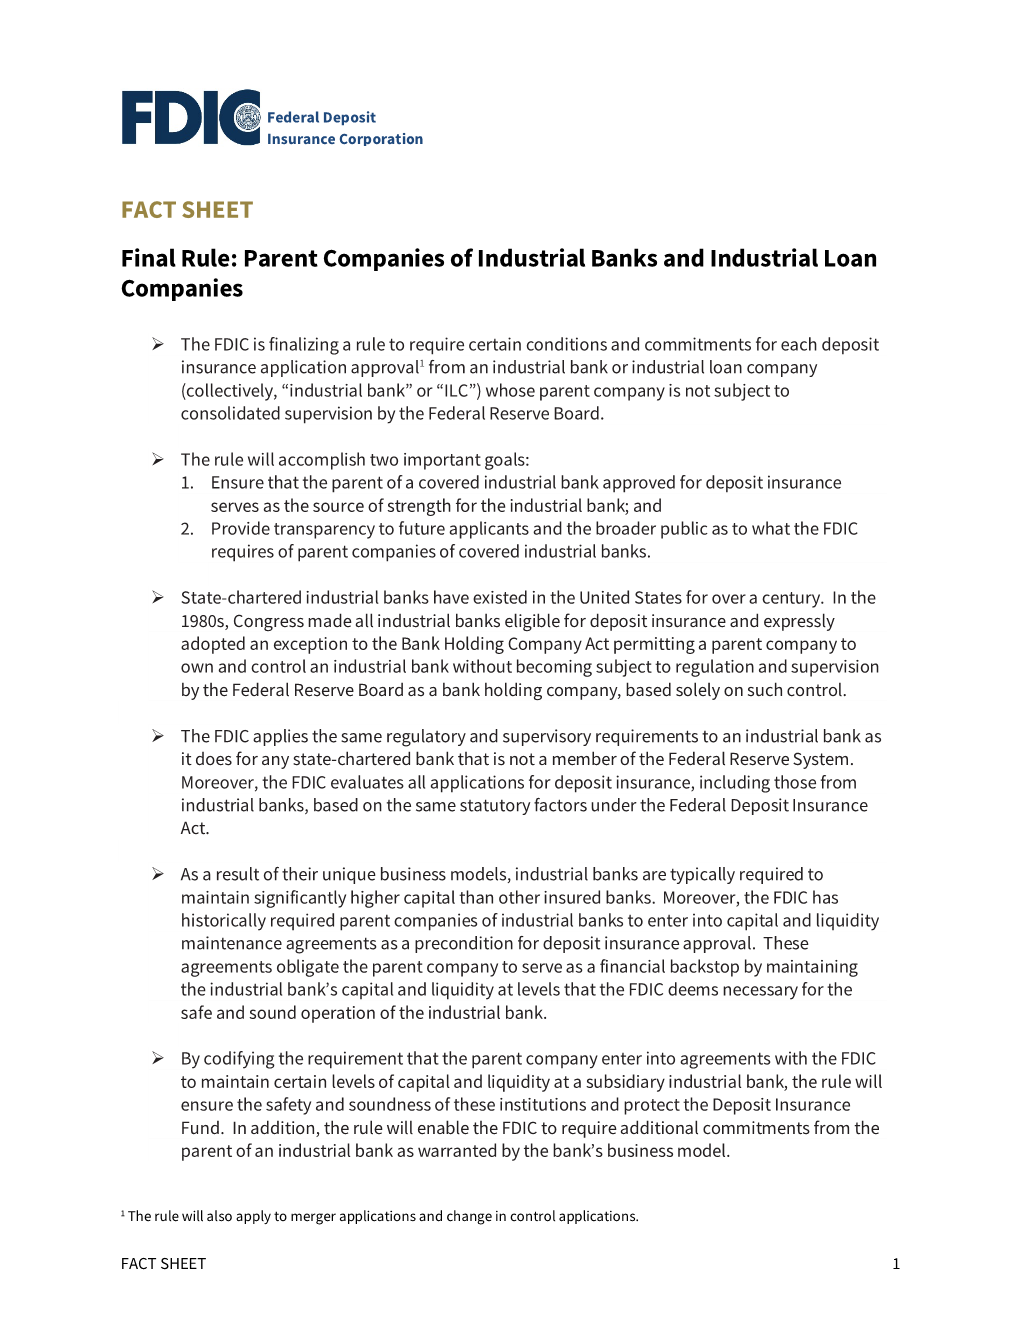 FACT SHEET Final Rule: Parent Companies of Industrial Banks and Industrial Loan Companies